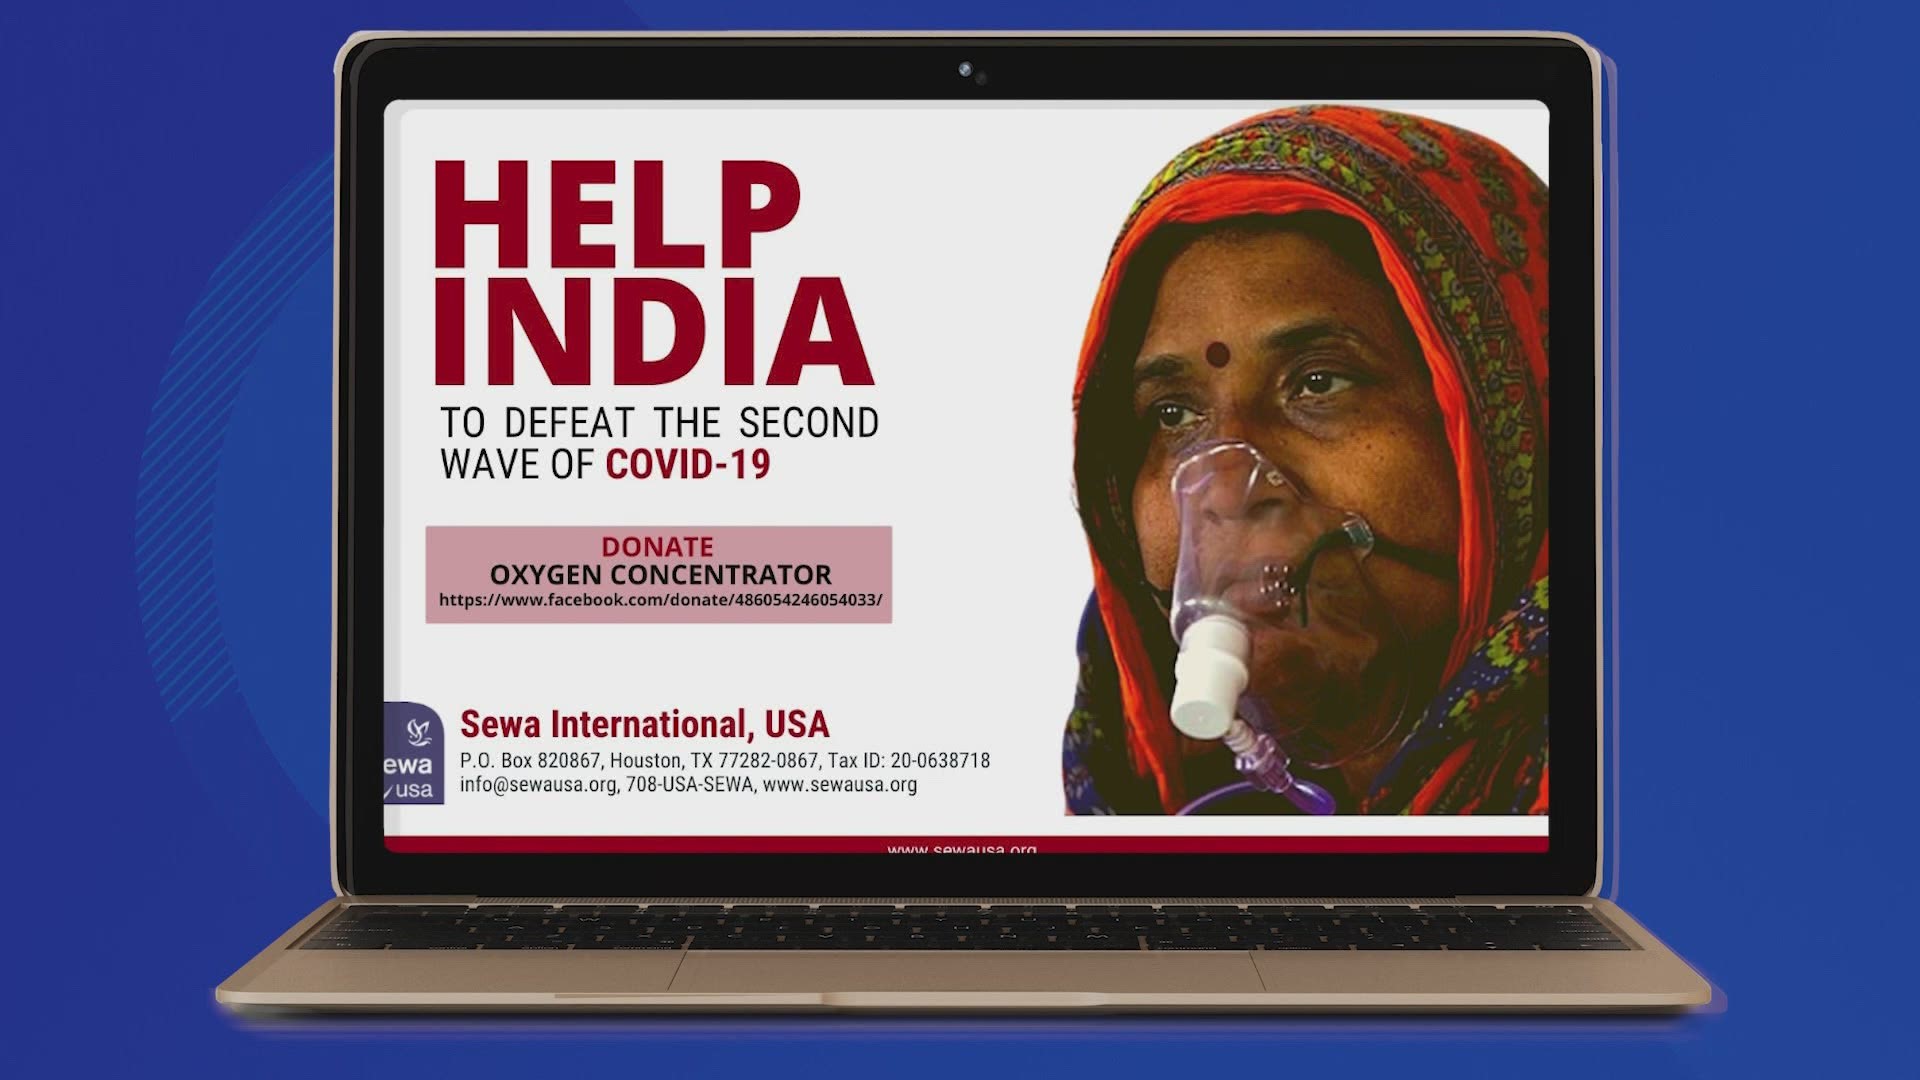 About half of the world's new COVID cases are being reported in India.